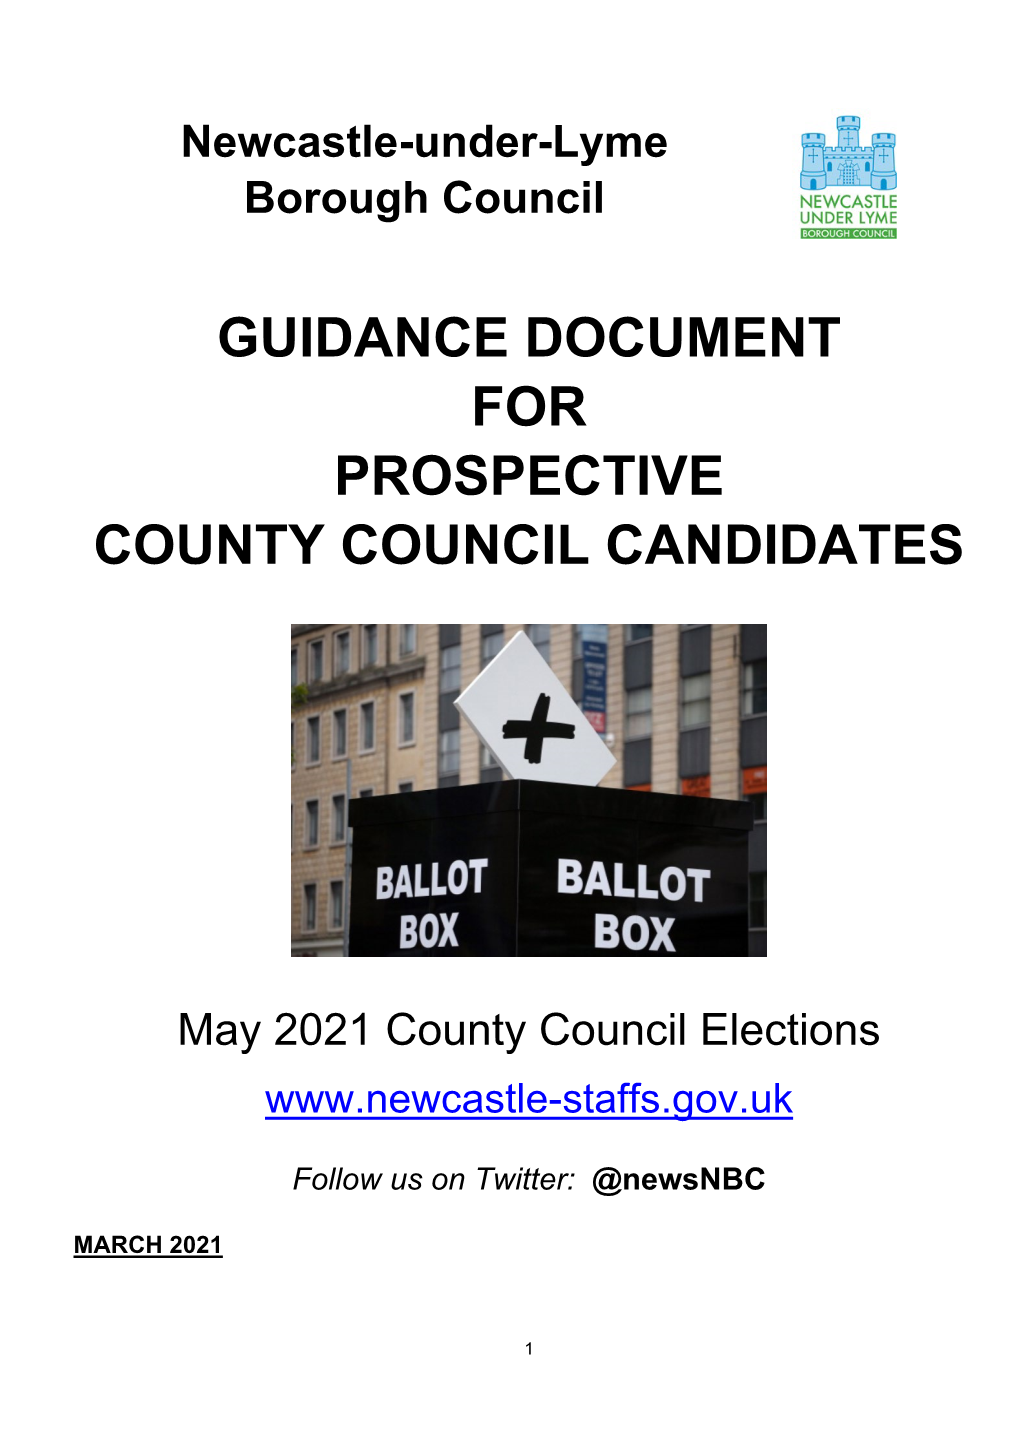 Guidance Document for Prospective County Council Candidates